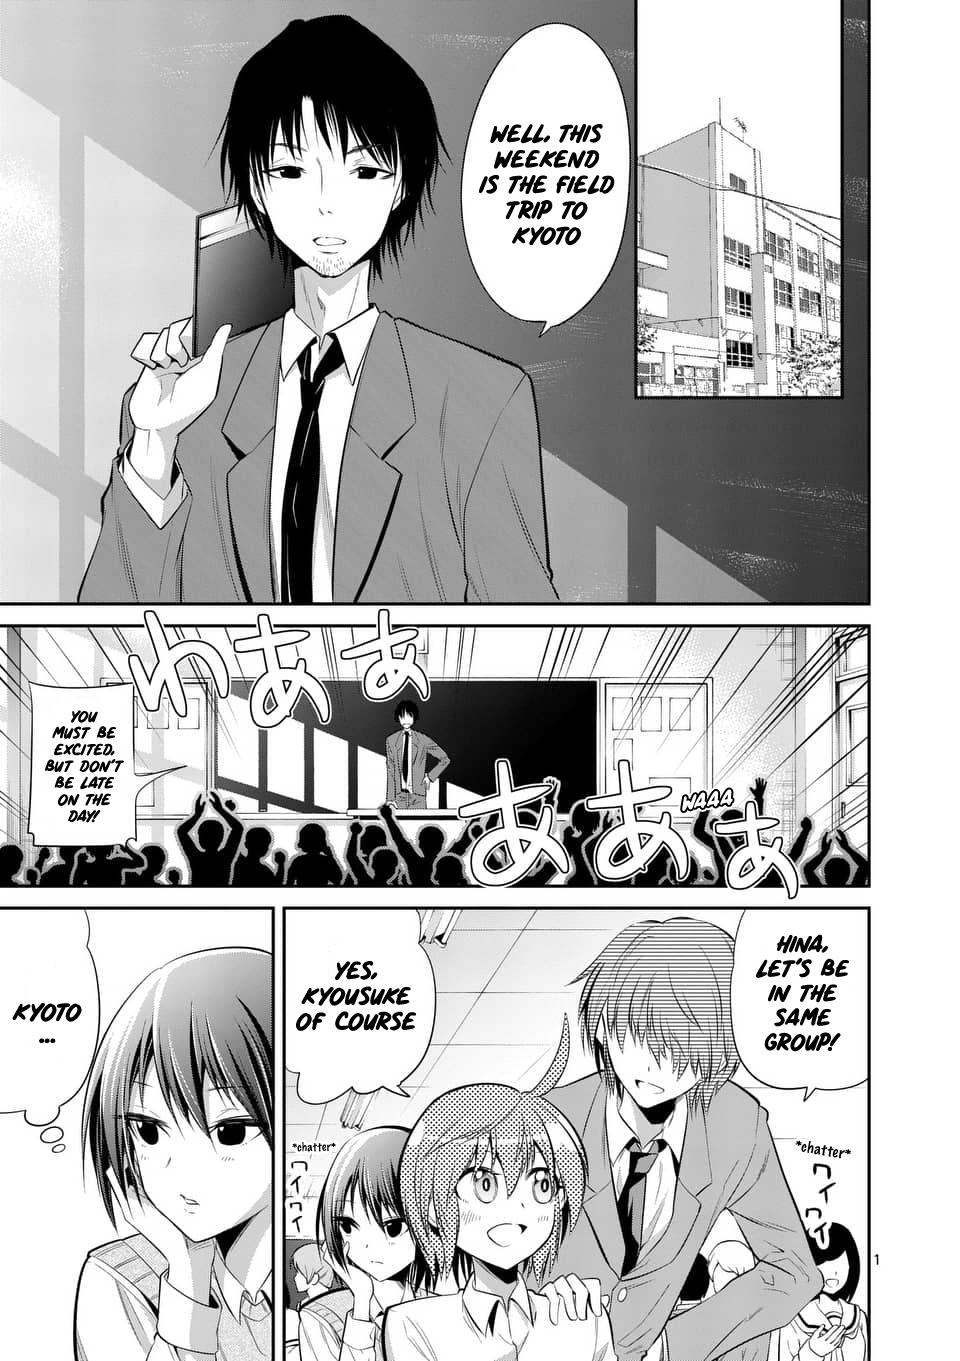 Classroom of the Elite, Chapter 48 - Classroom of the Elite Manga Online